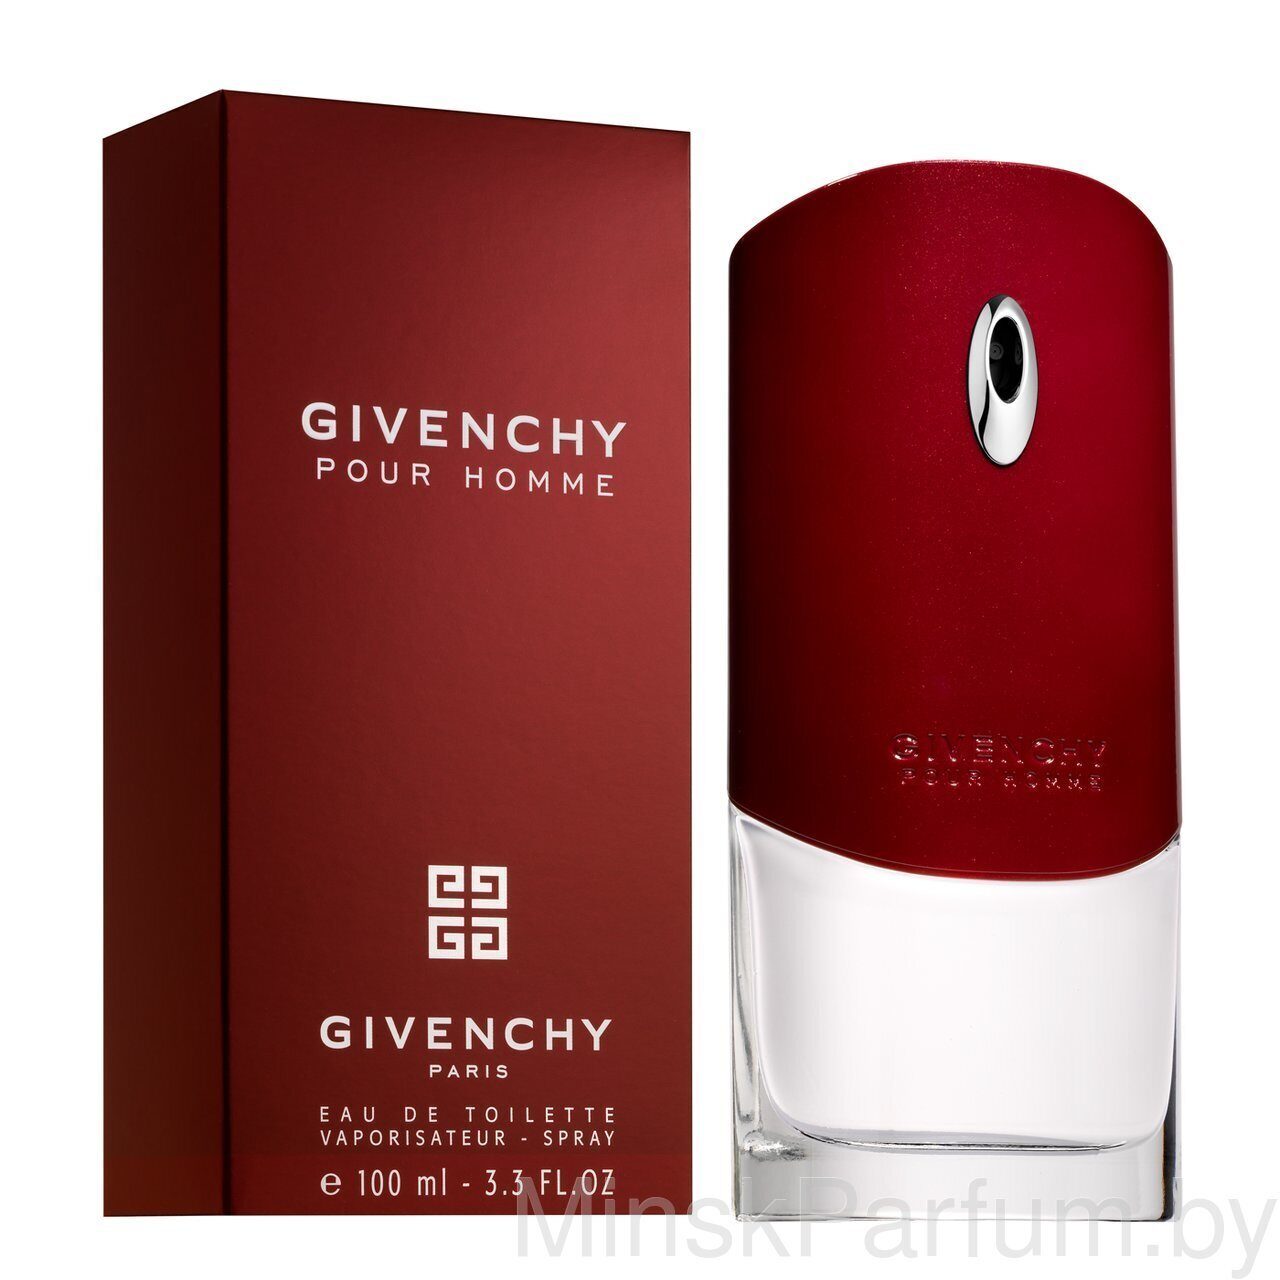 Givenchy "Pour Homme" Edt 100ml